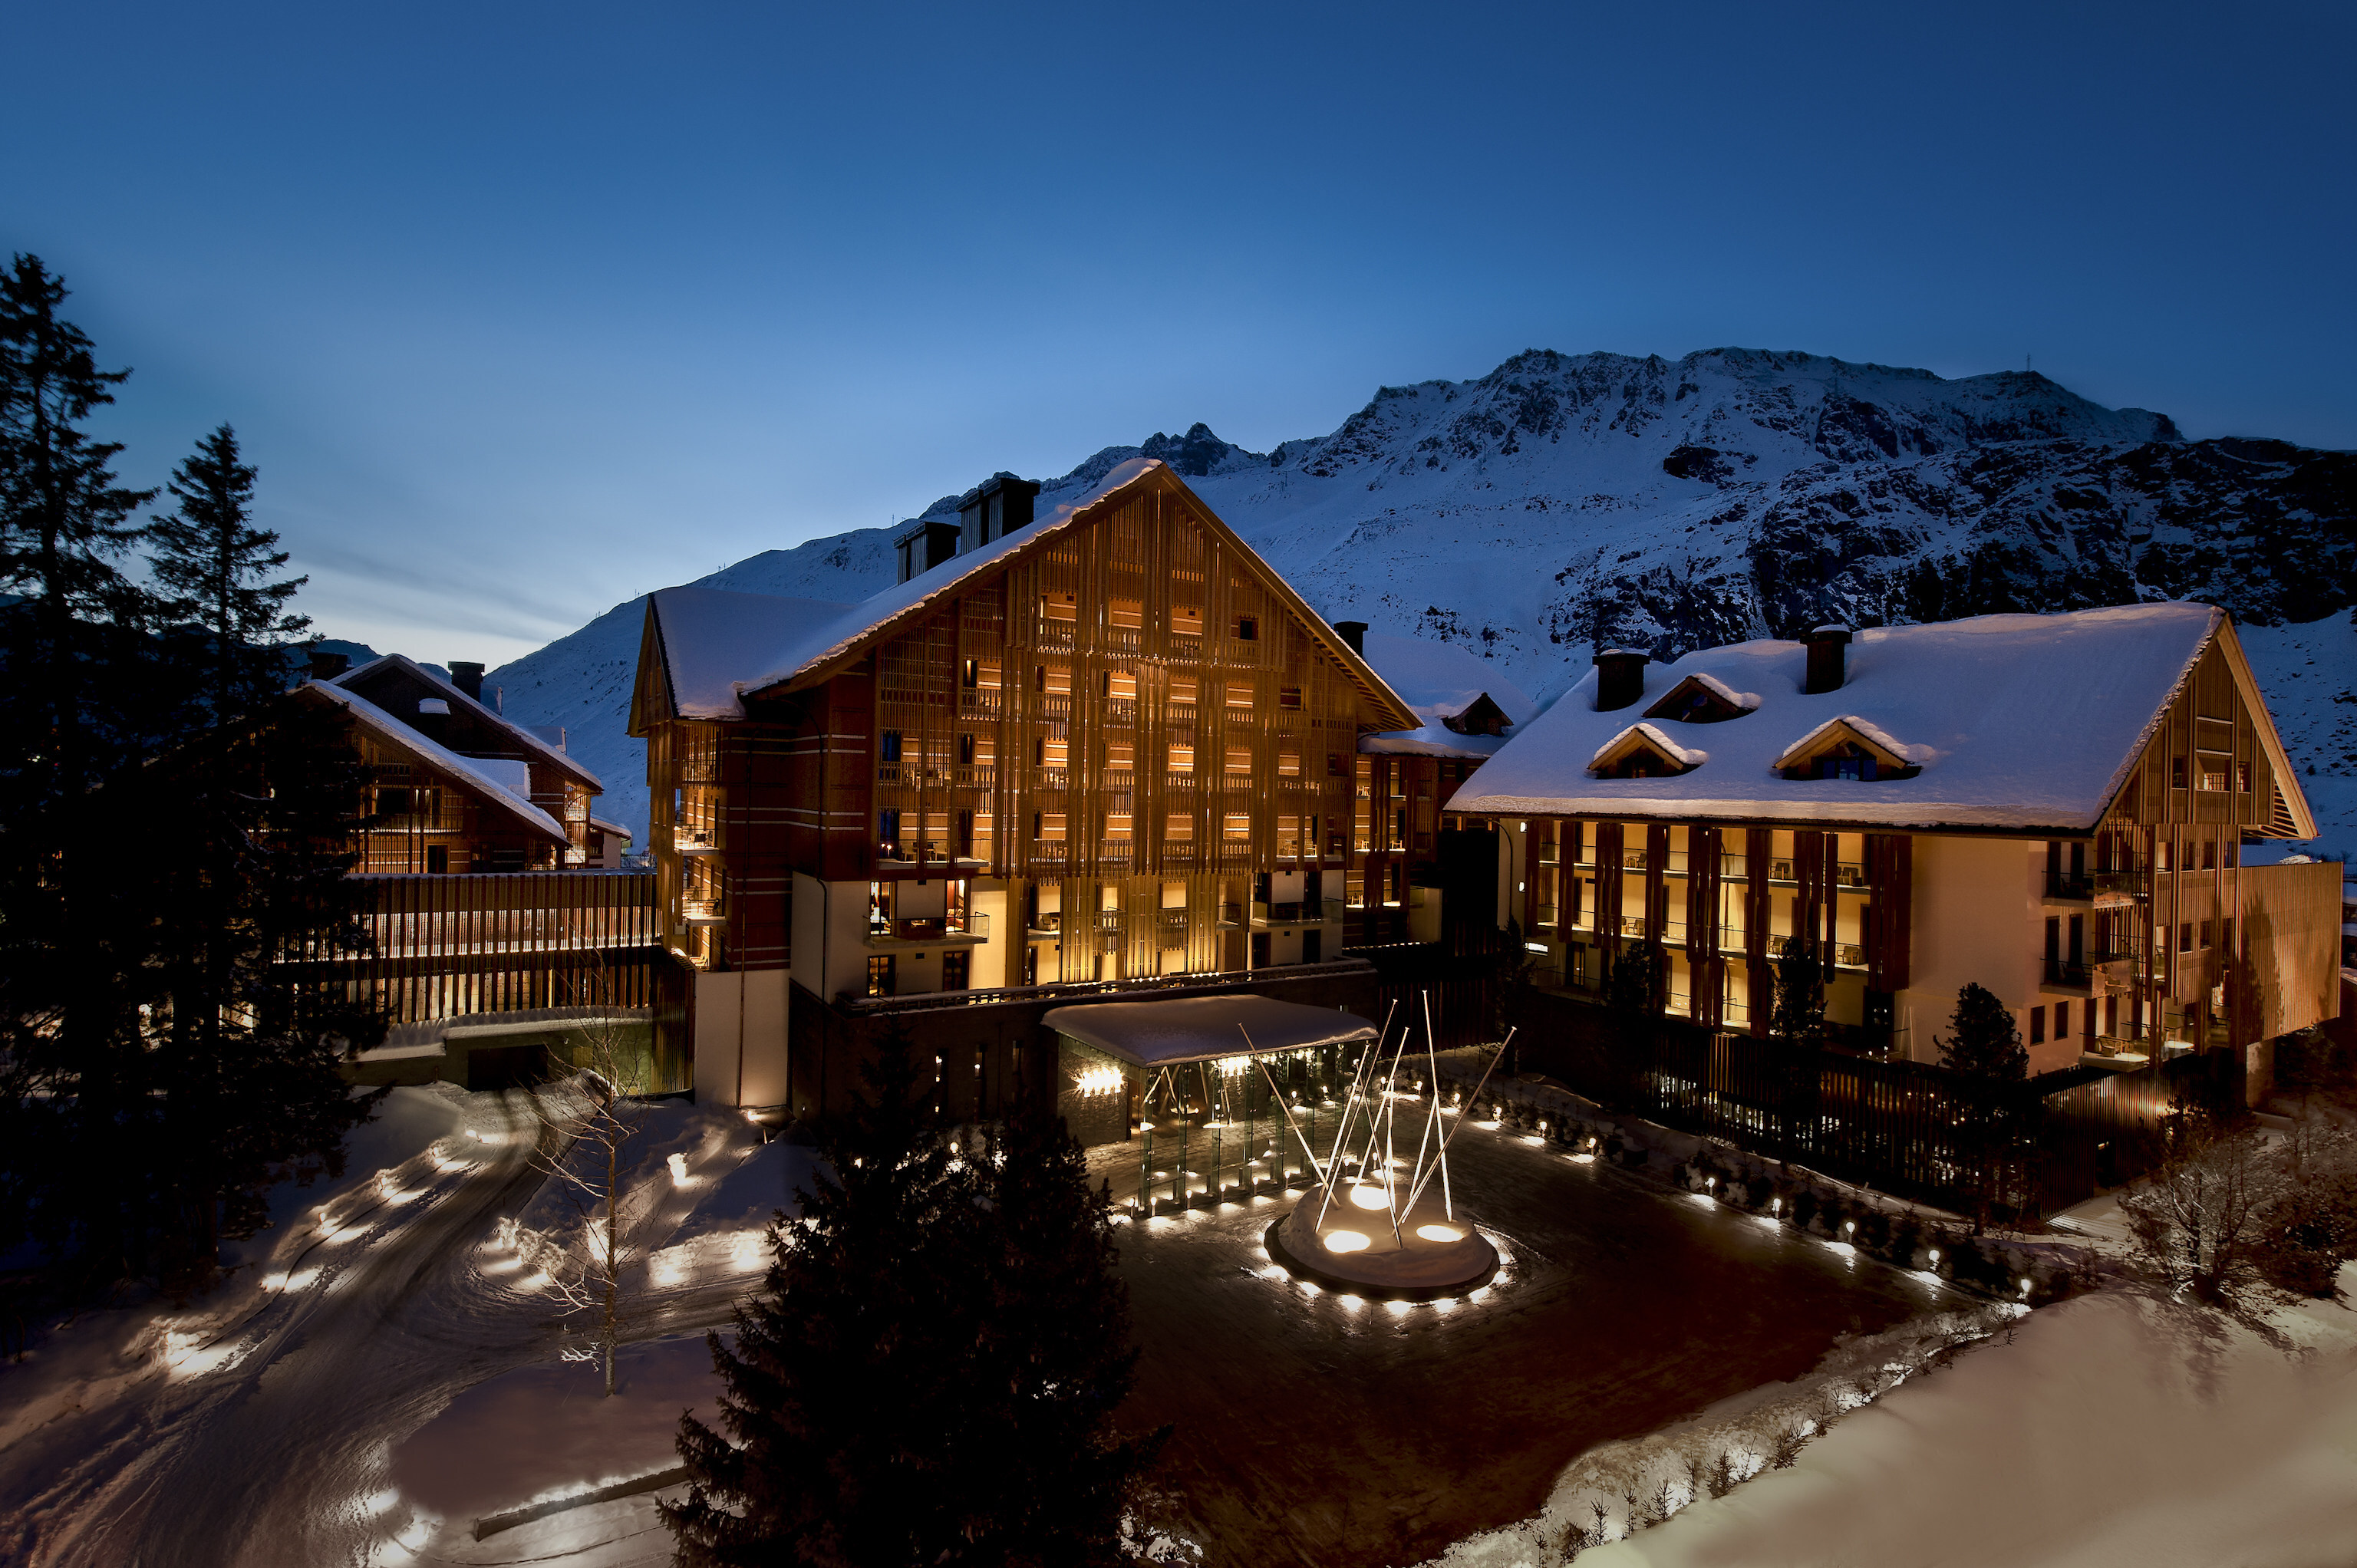 The five-star Chedi Andermatt in the Swiss Alps, which has begun to accept the digital currencies bitcoin and ethereum as payment for stays. Photo: Chedi Andermatt hotel